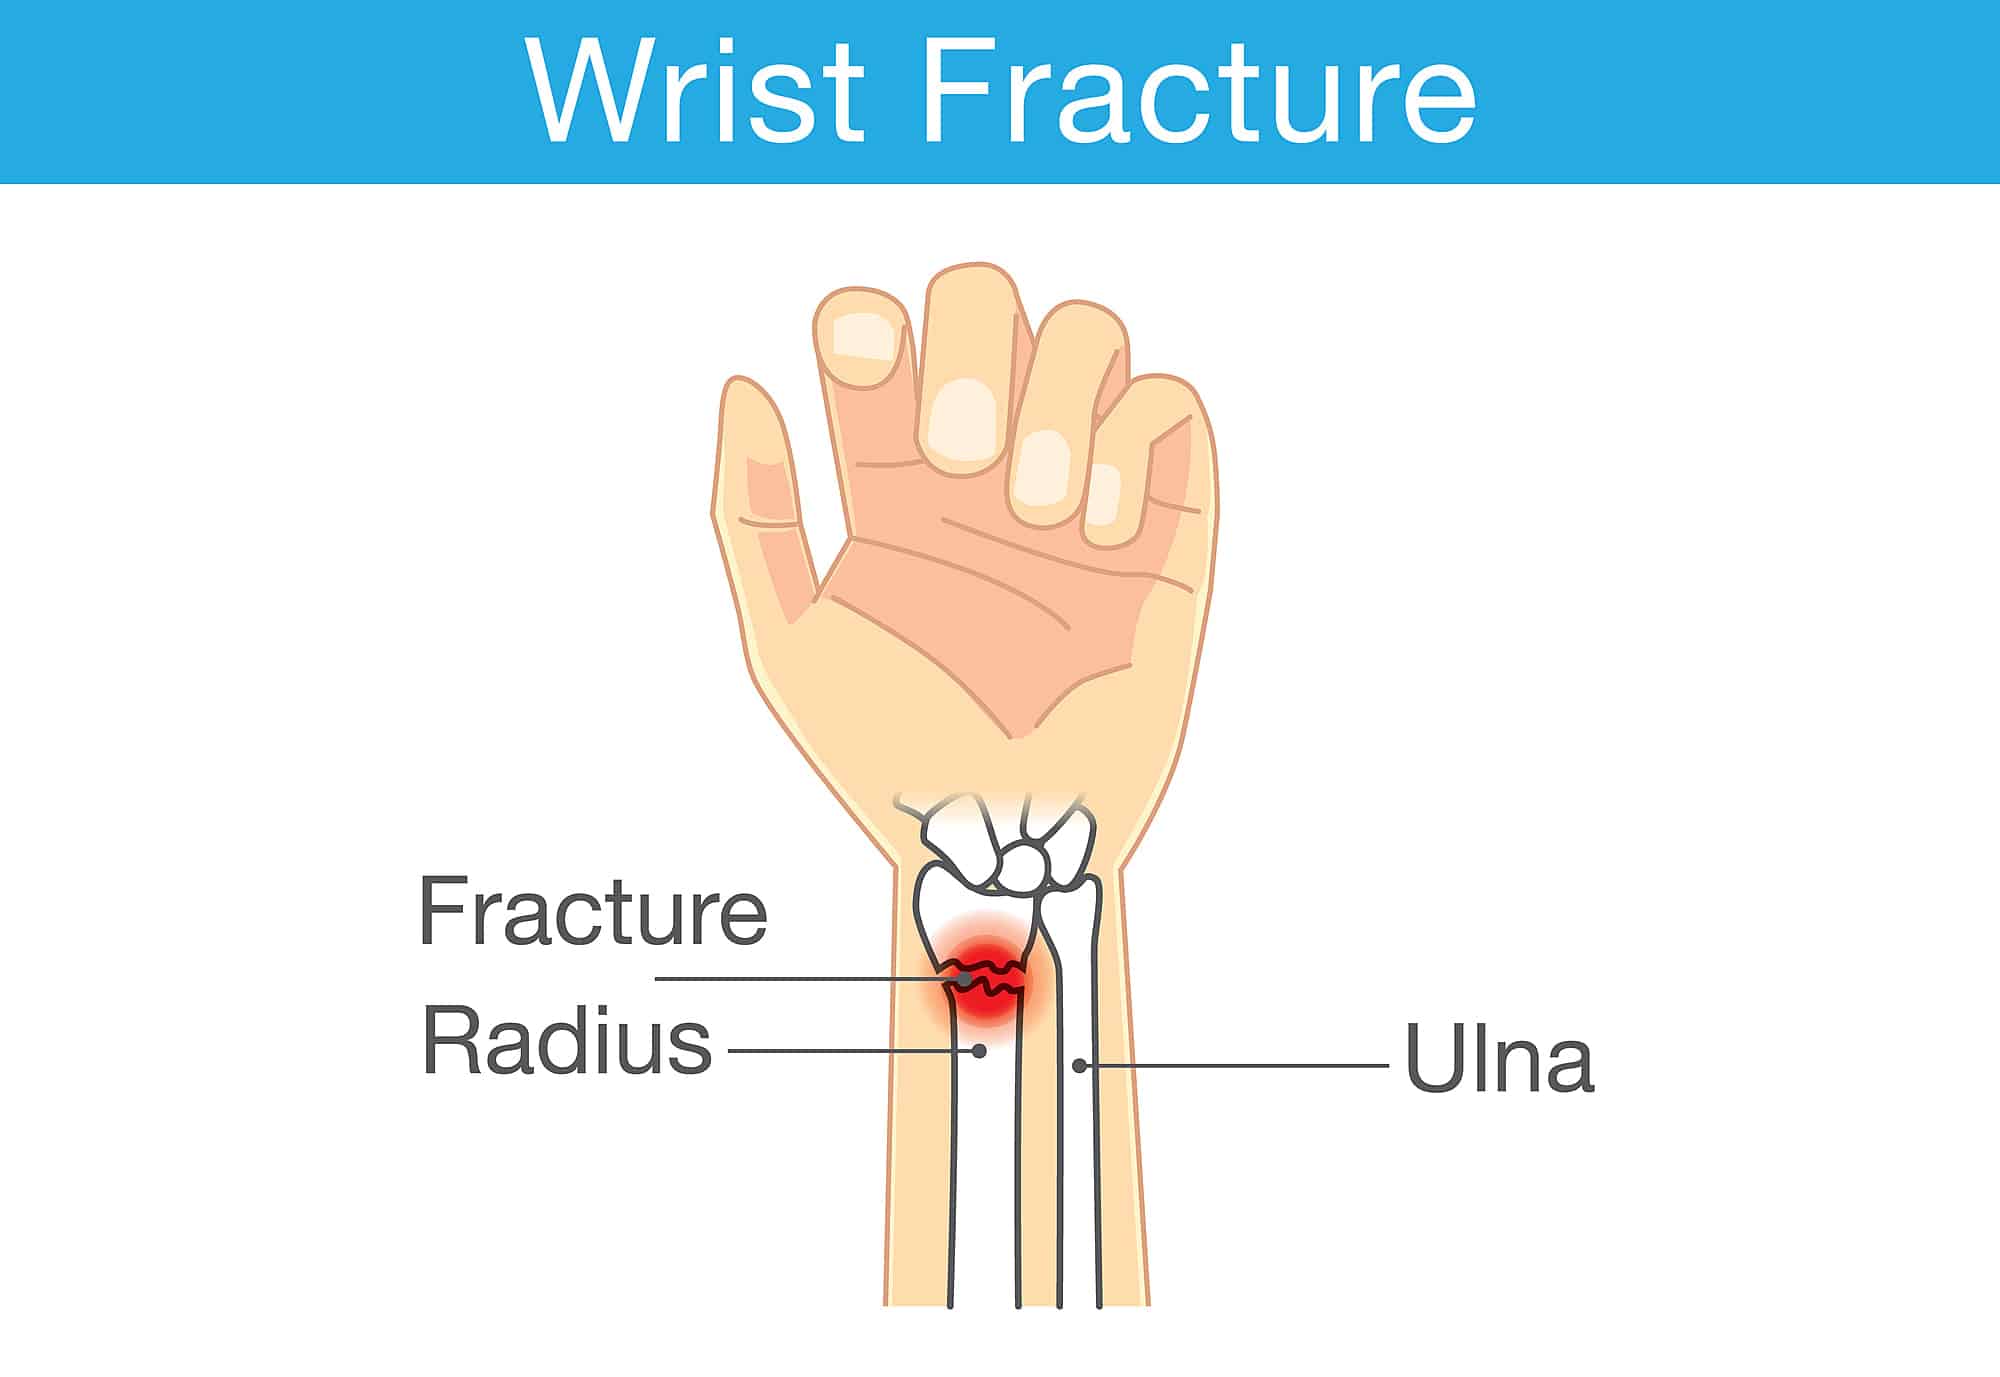 Wrist Fracture in Singapore